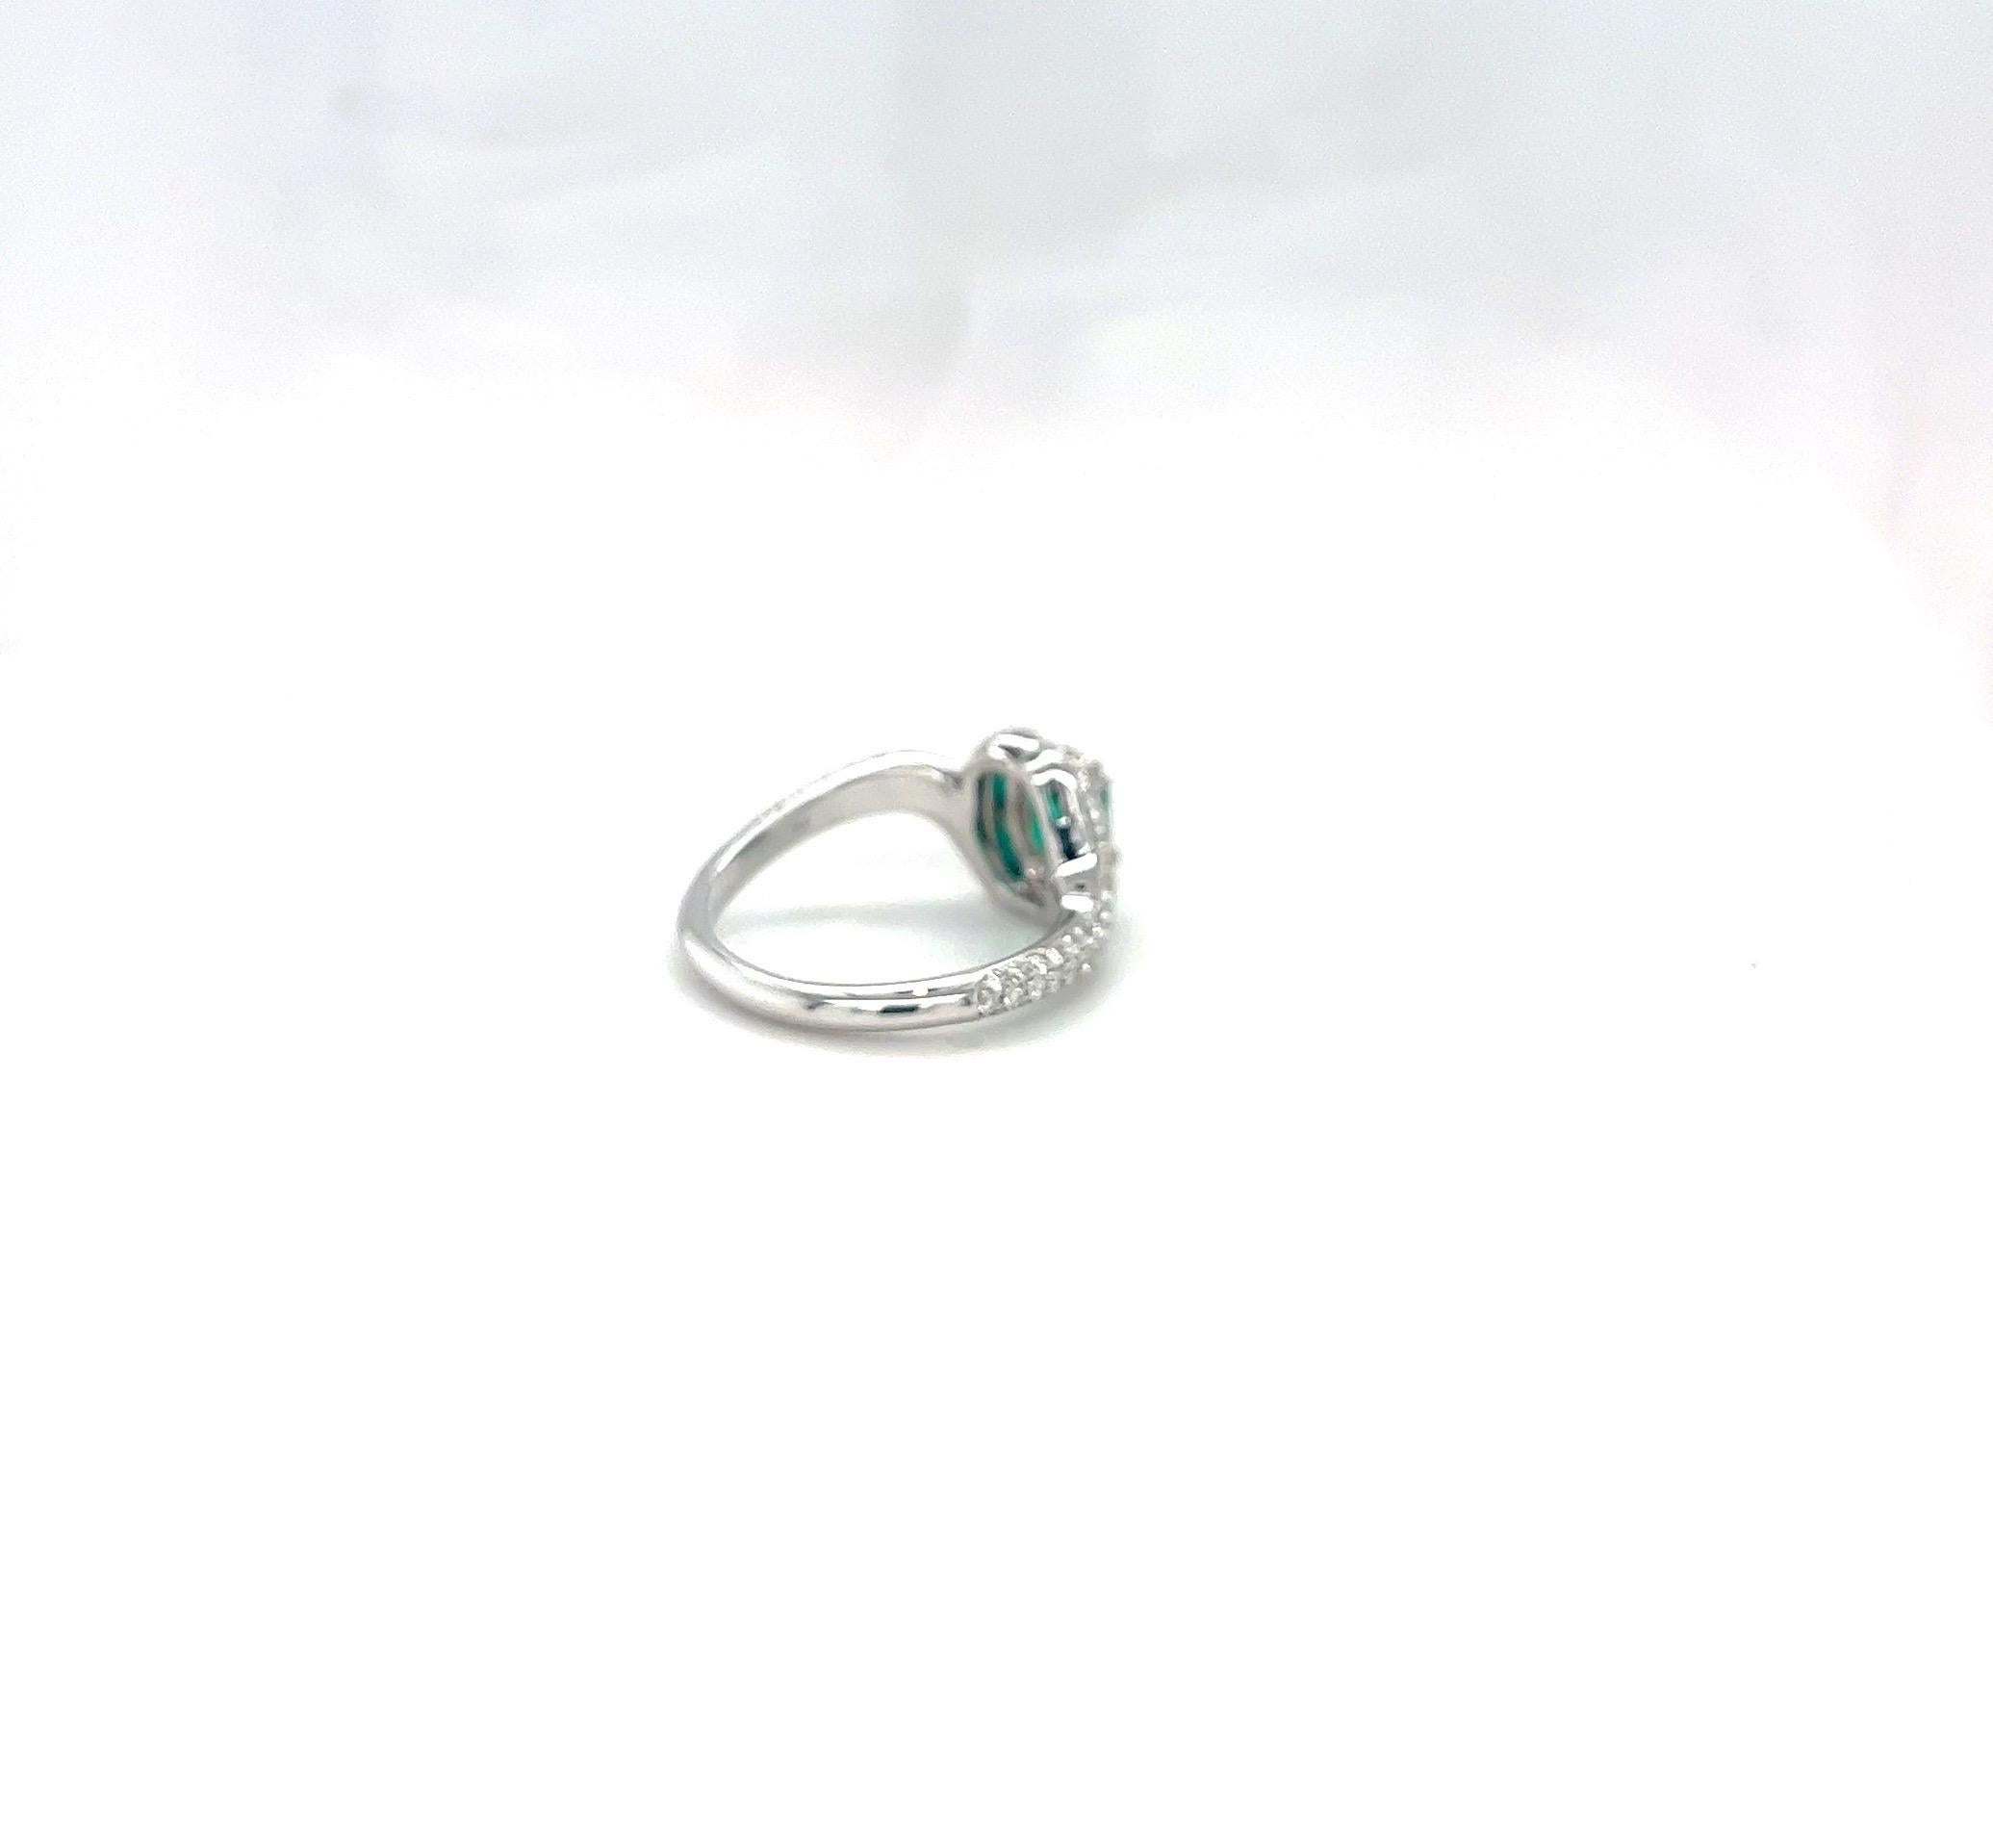 Emerald Cut 18 Karat White Gold 1.01 Ct Colombian Emerald and 1.01 Ct. Diamond Ring For Sale